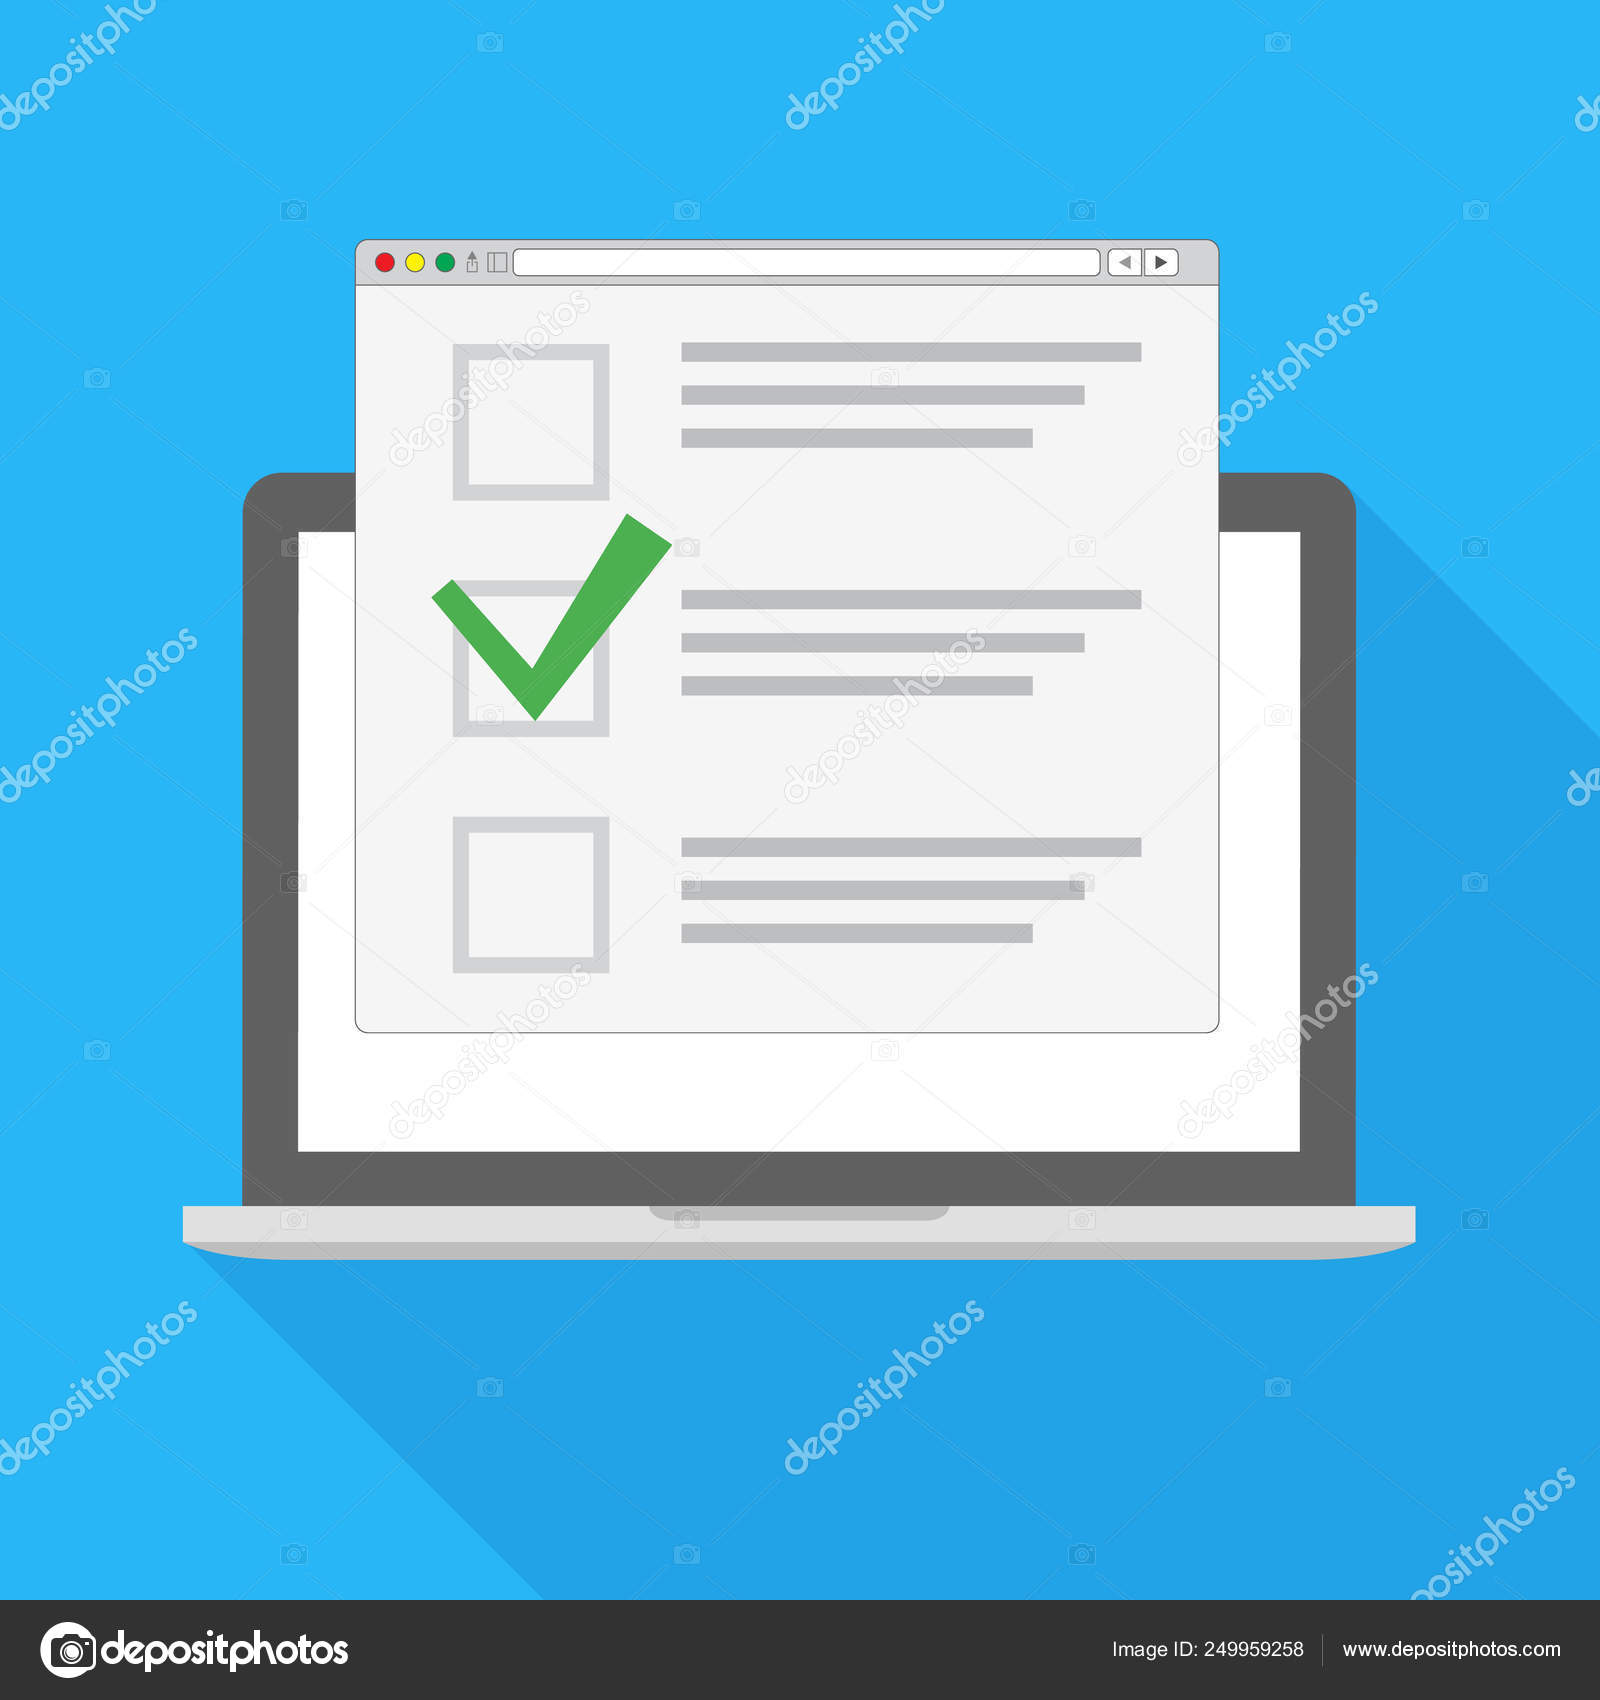 Computer Laptop With Checklist On Screen Online Form Survey Laptop With Showing Long Quiz Exam Paper Sheet Document Online Questionnaire Results Stock Vector Image By C Microphoto1981 Gmail Com 249959258